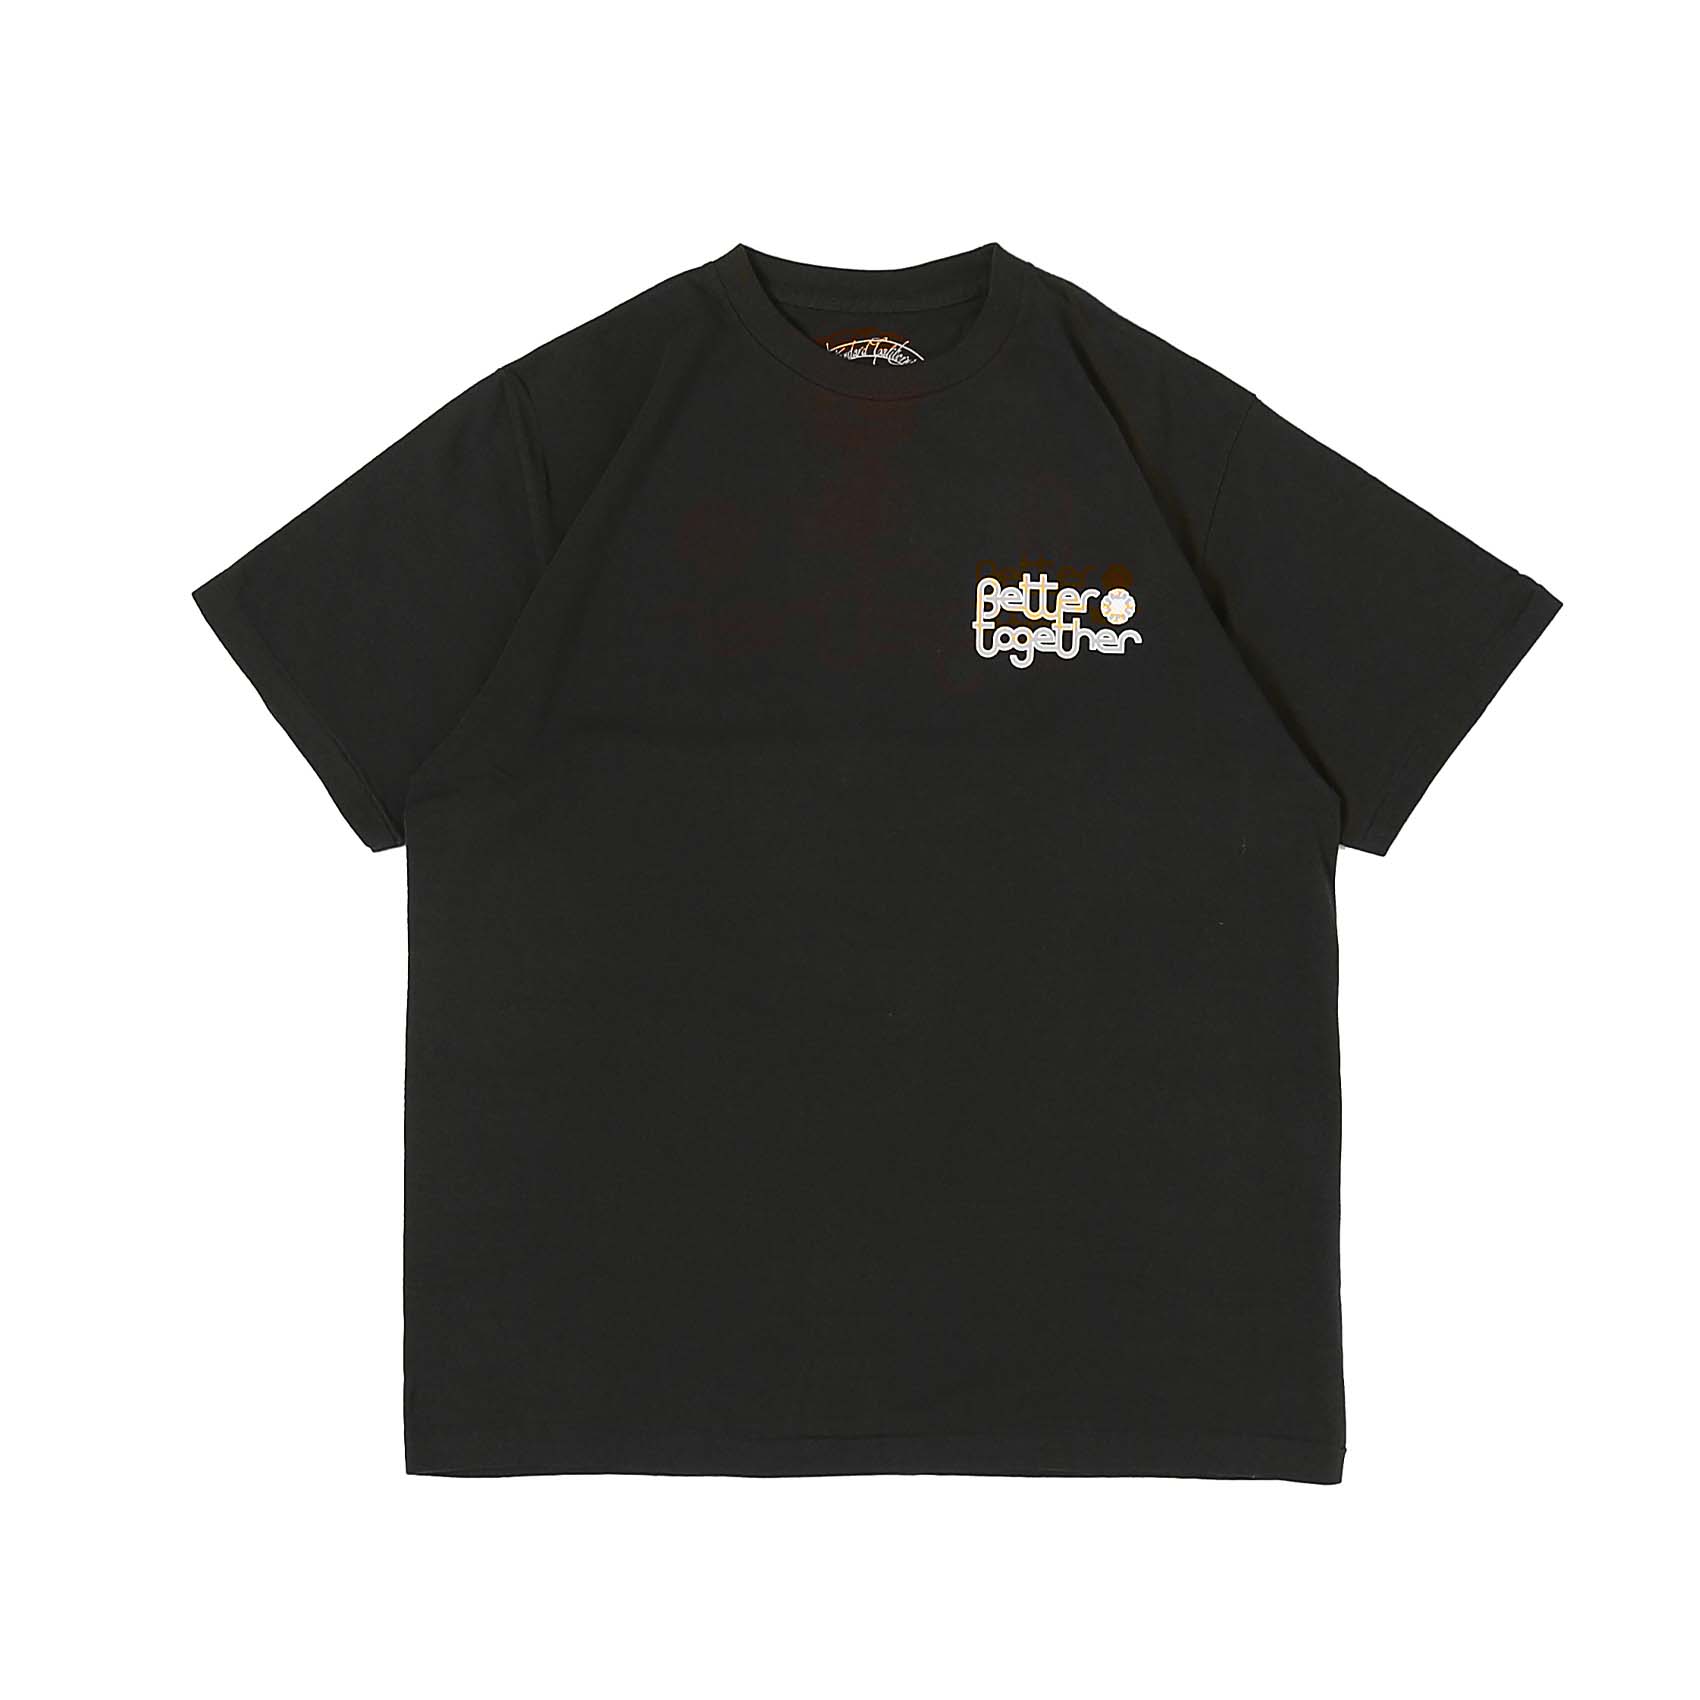 BETTER TOGETHER S/S TEE - BLACK